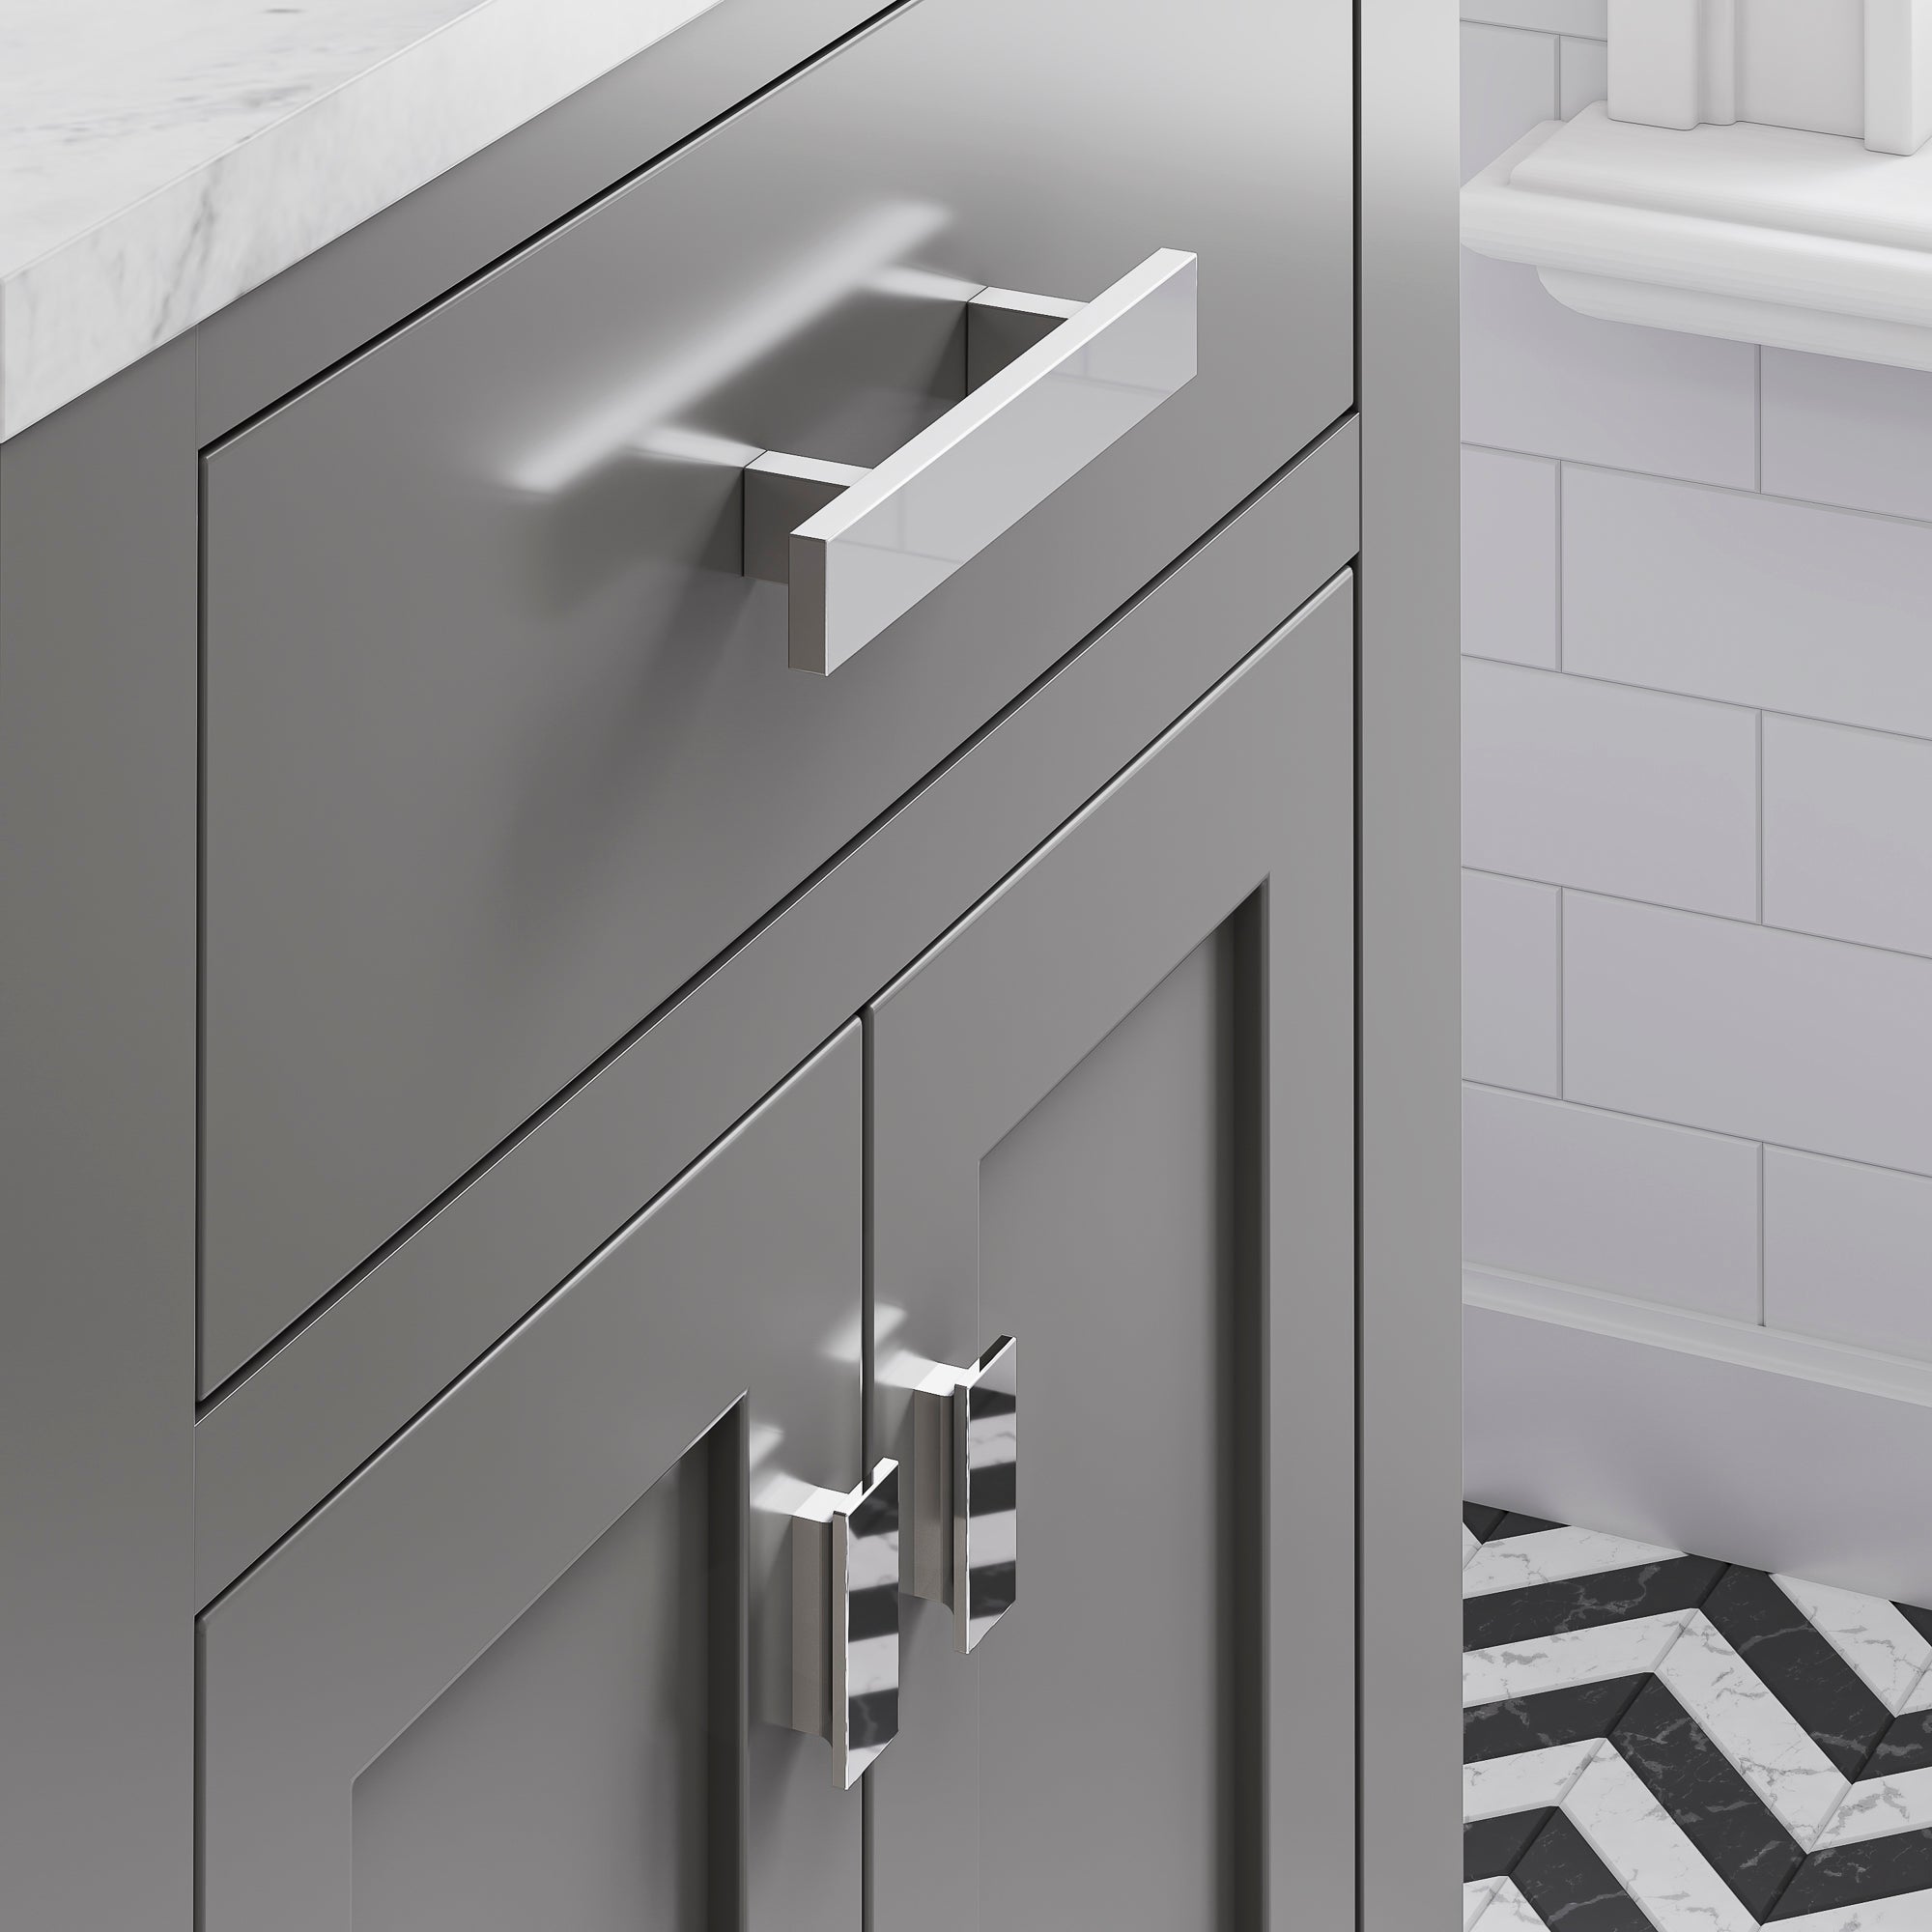 Water Creation | 24 Inch Cashmere Grey Single Sink Bathroom Vanity With Matching Framed Mirror And Faucet From The Madison Collection | MS24CW01CG-R21BX0901